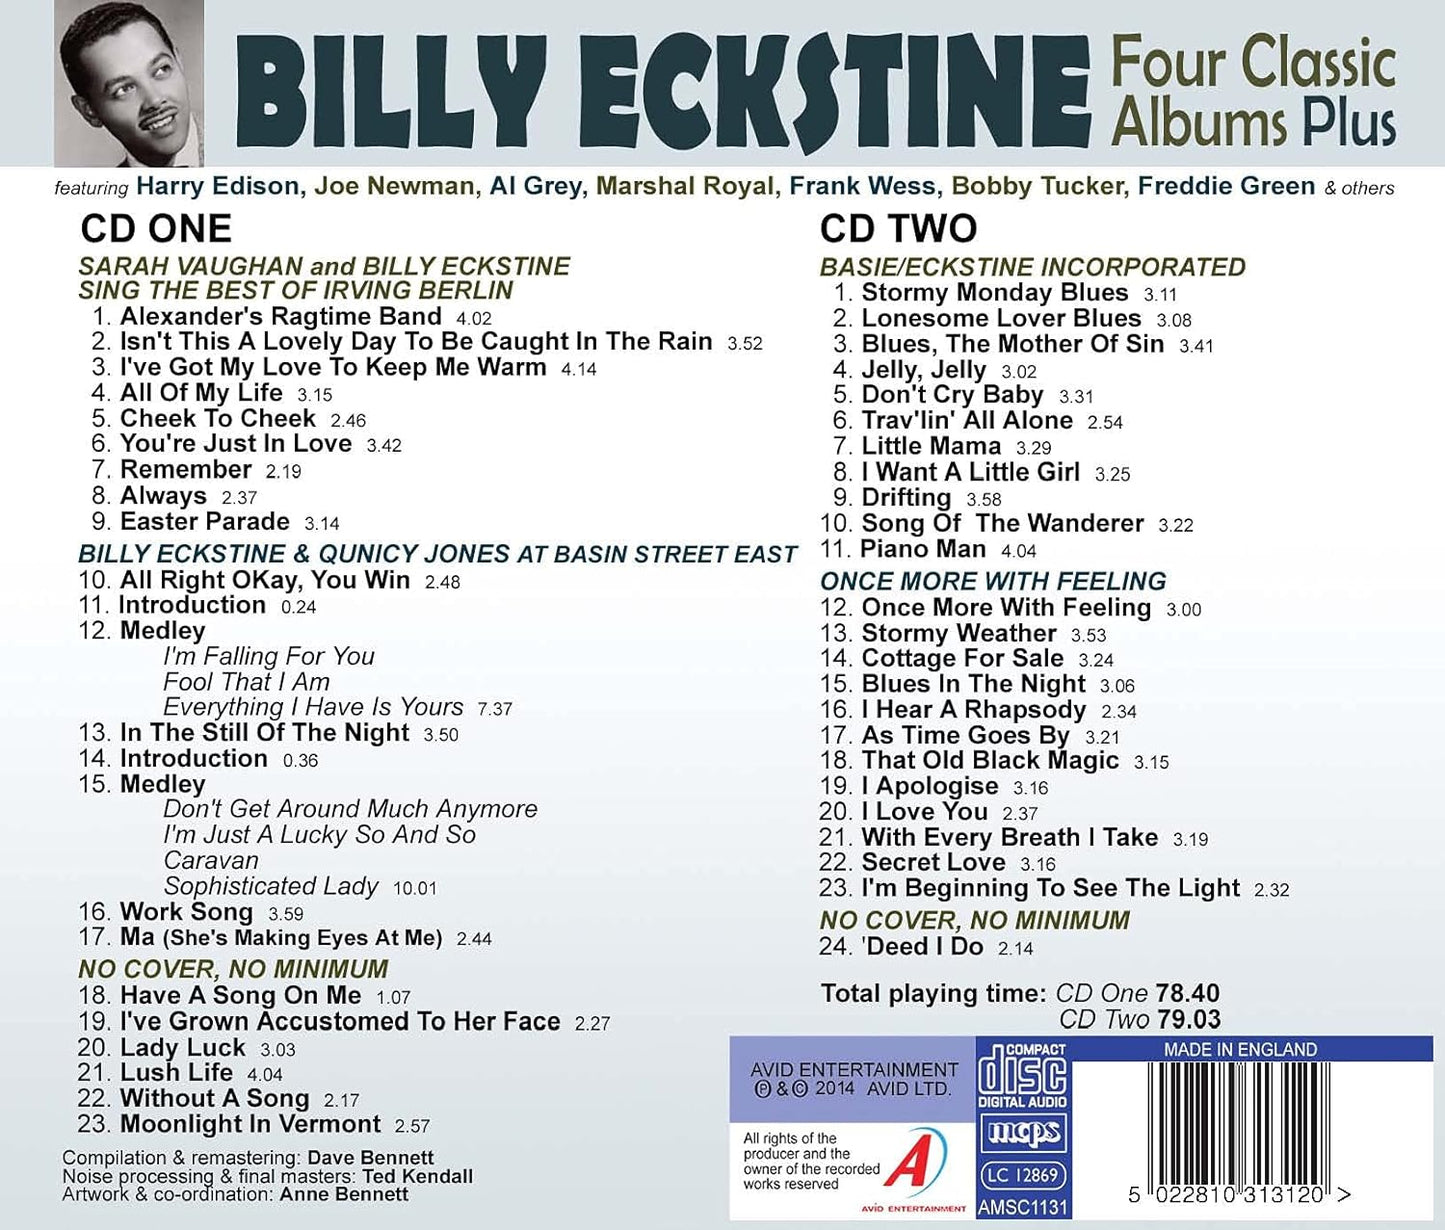 BILLY ECKSTINE - Four Classic Albums Plus (SARAH VAUGHAN AND BILLY ECKSTINE SING THE BEST OF IRVING BERLIN / BILLY ECKSTINE & QUINCY JONES AT BASIN STREET EAST / BASIE-ECKSTINE INCORPORATED / ONCE MORE WITH FEELING) (2CD)